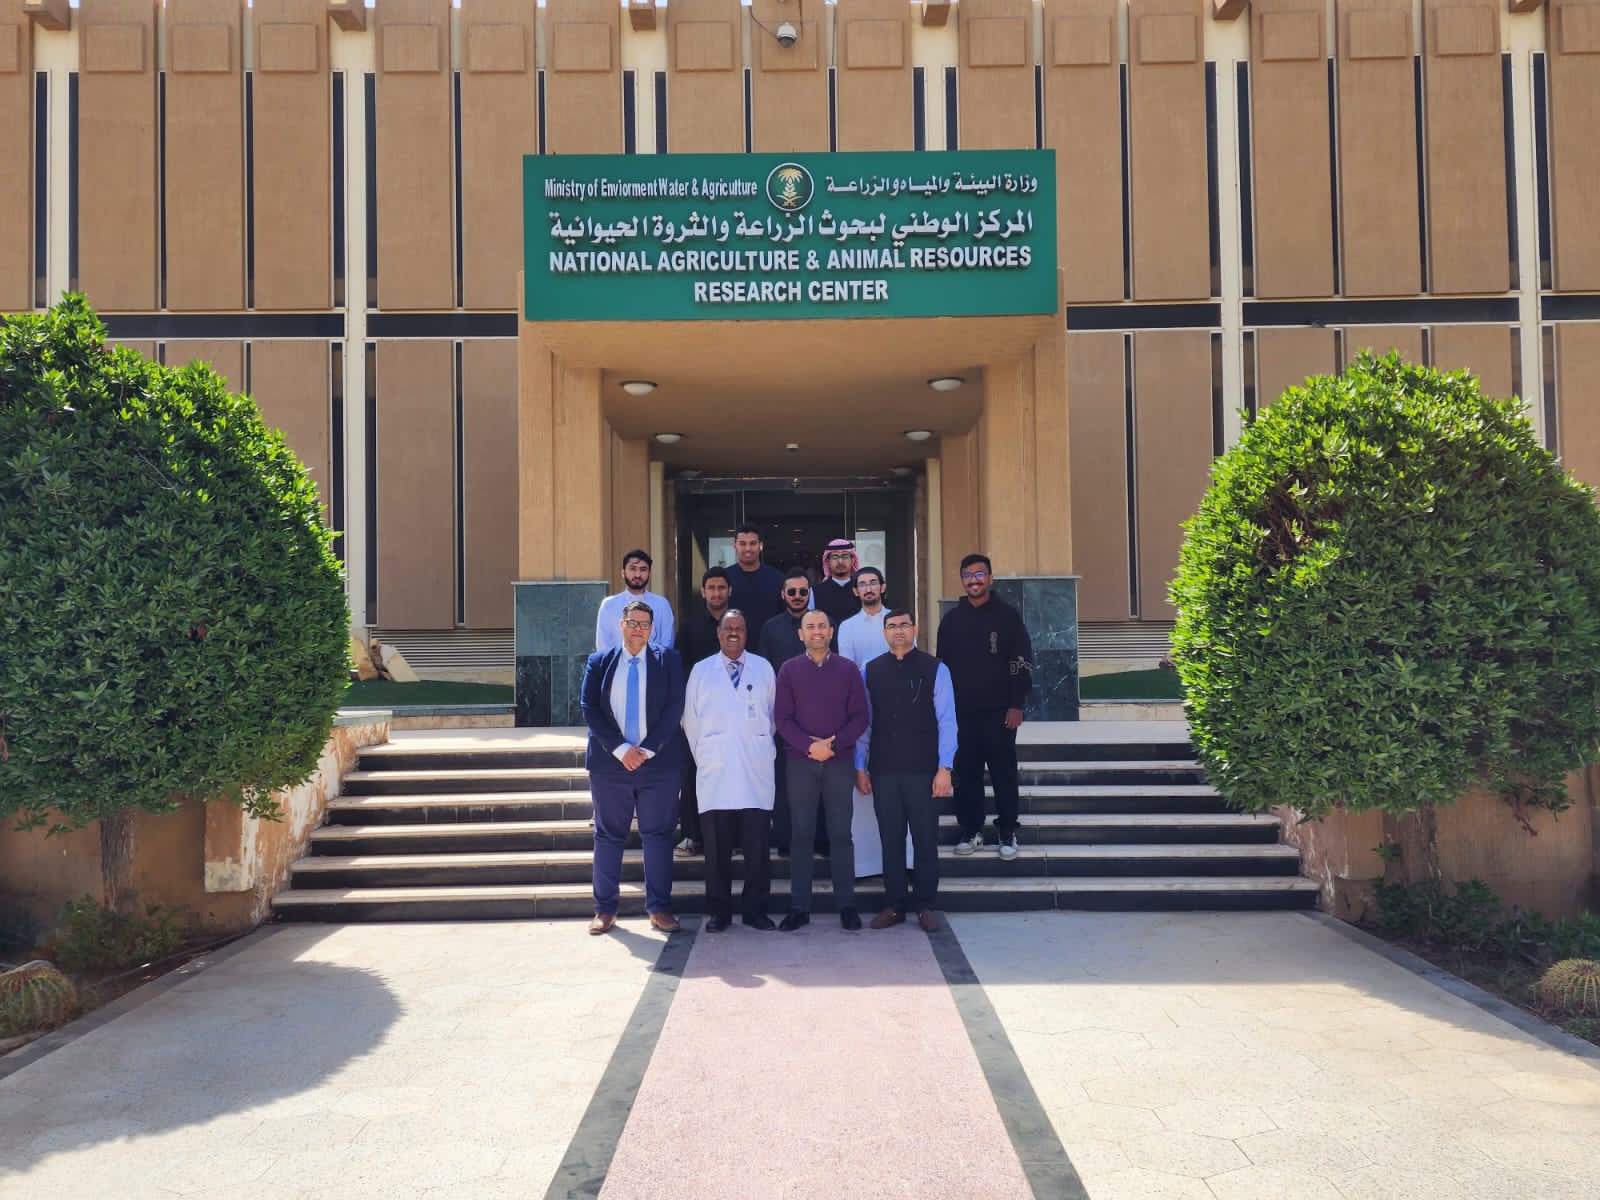 Students of the Department of Chemistry at the College of Sciences and Human Studies in Al-Kharj Visit the National Center for Agriculture and Livestock Research